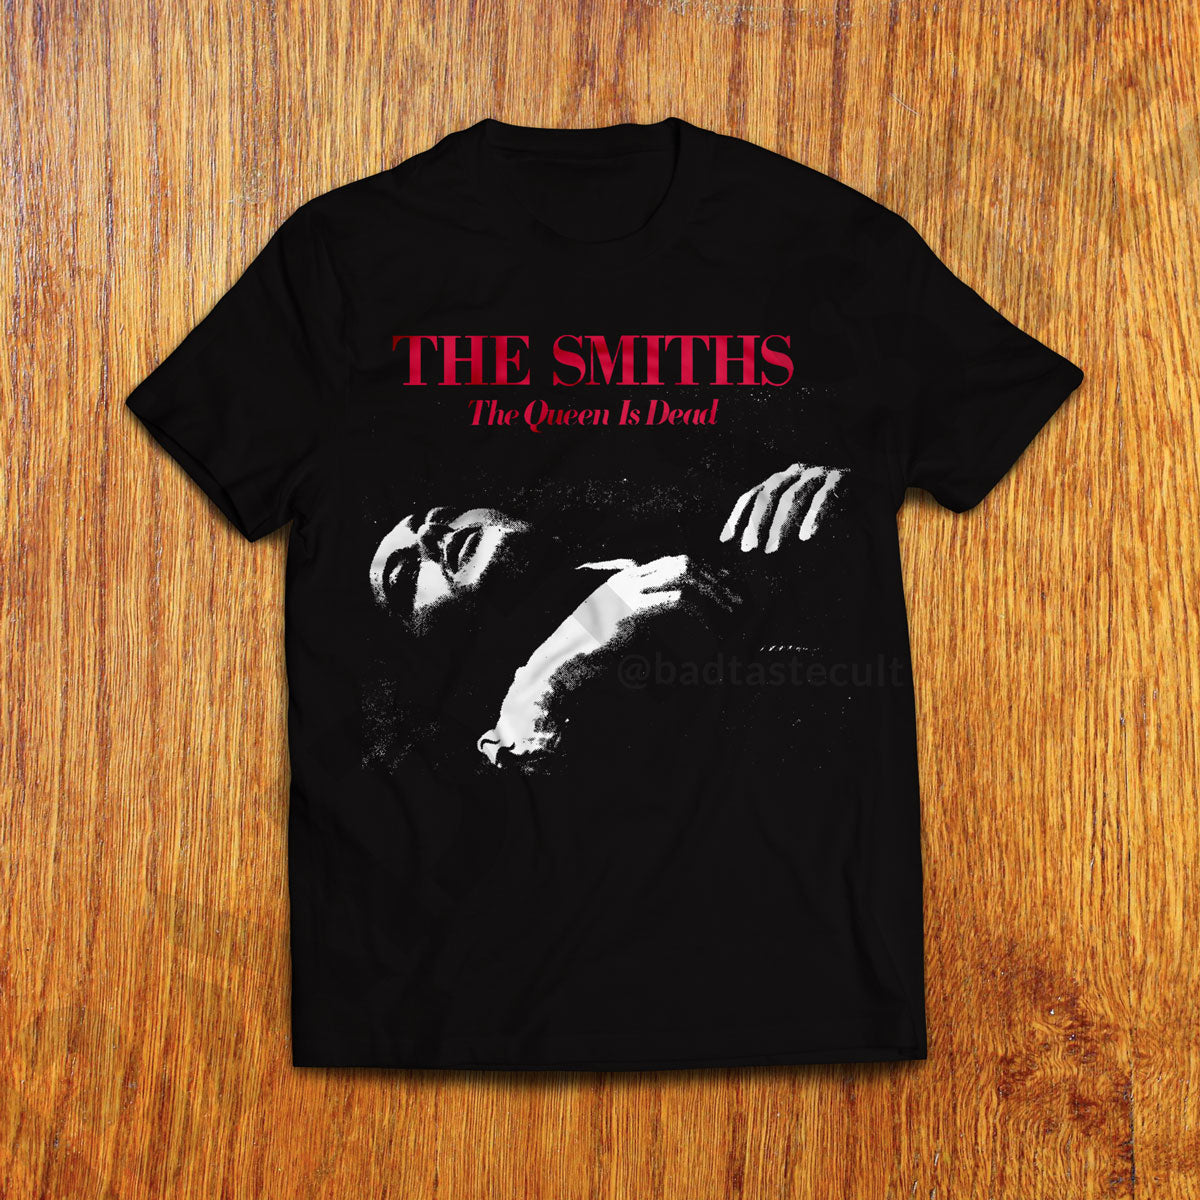 [POLO] The Smiths 'The Queen is Dead'